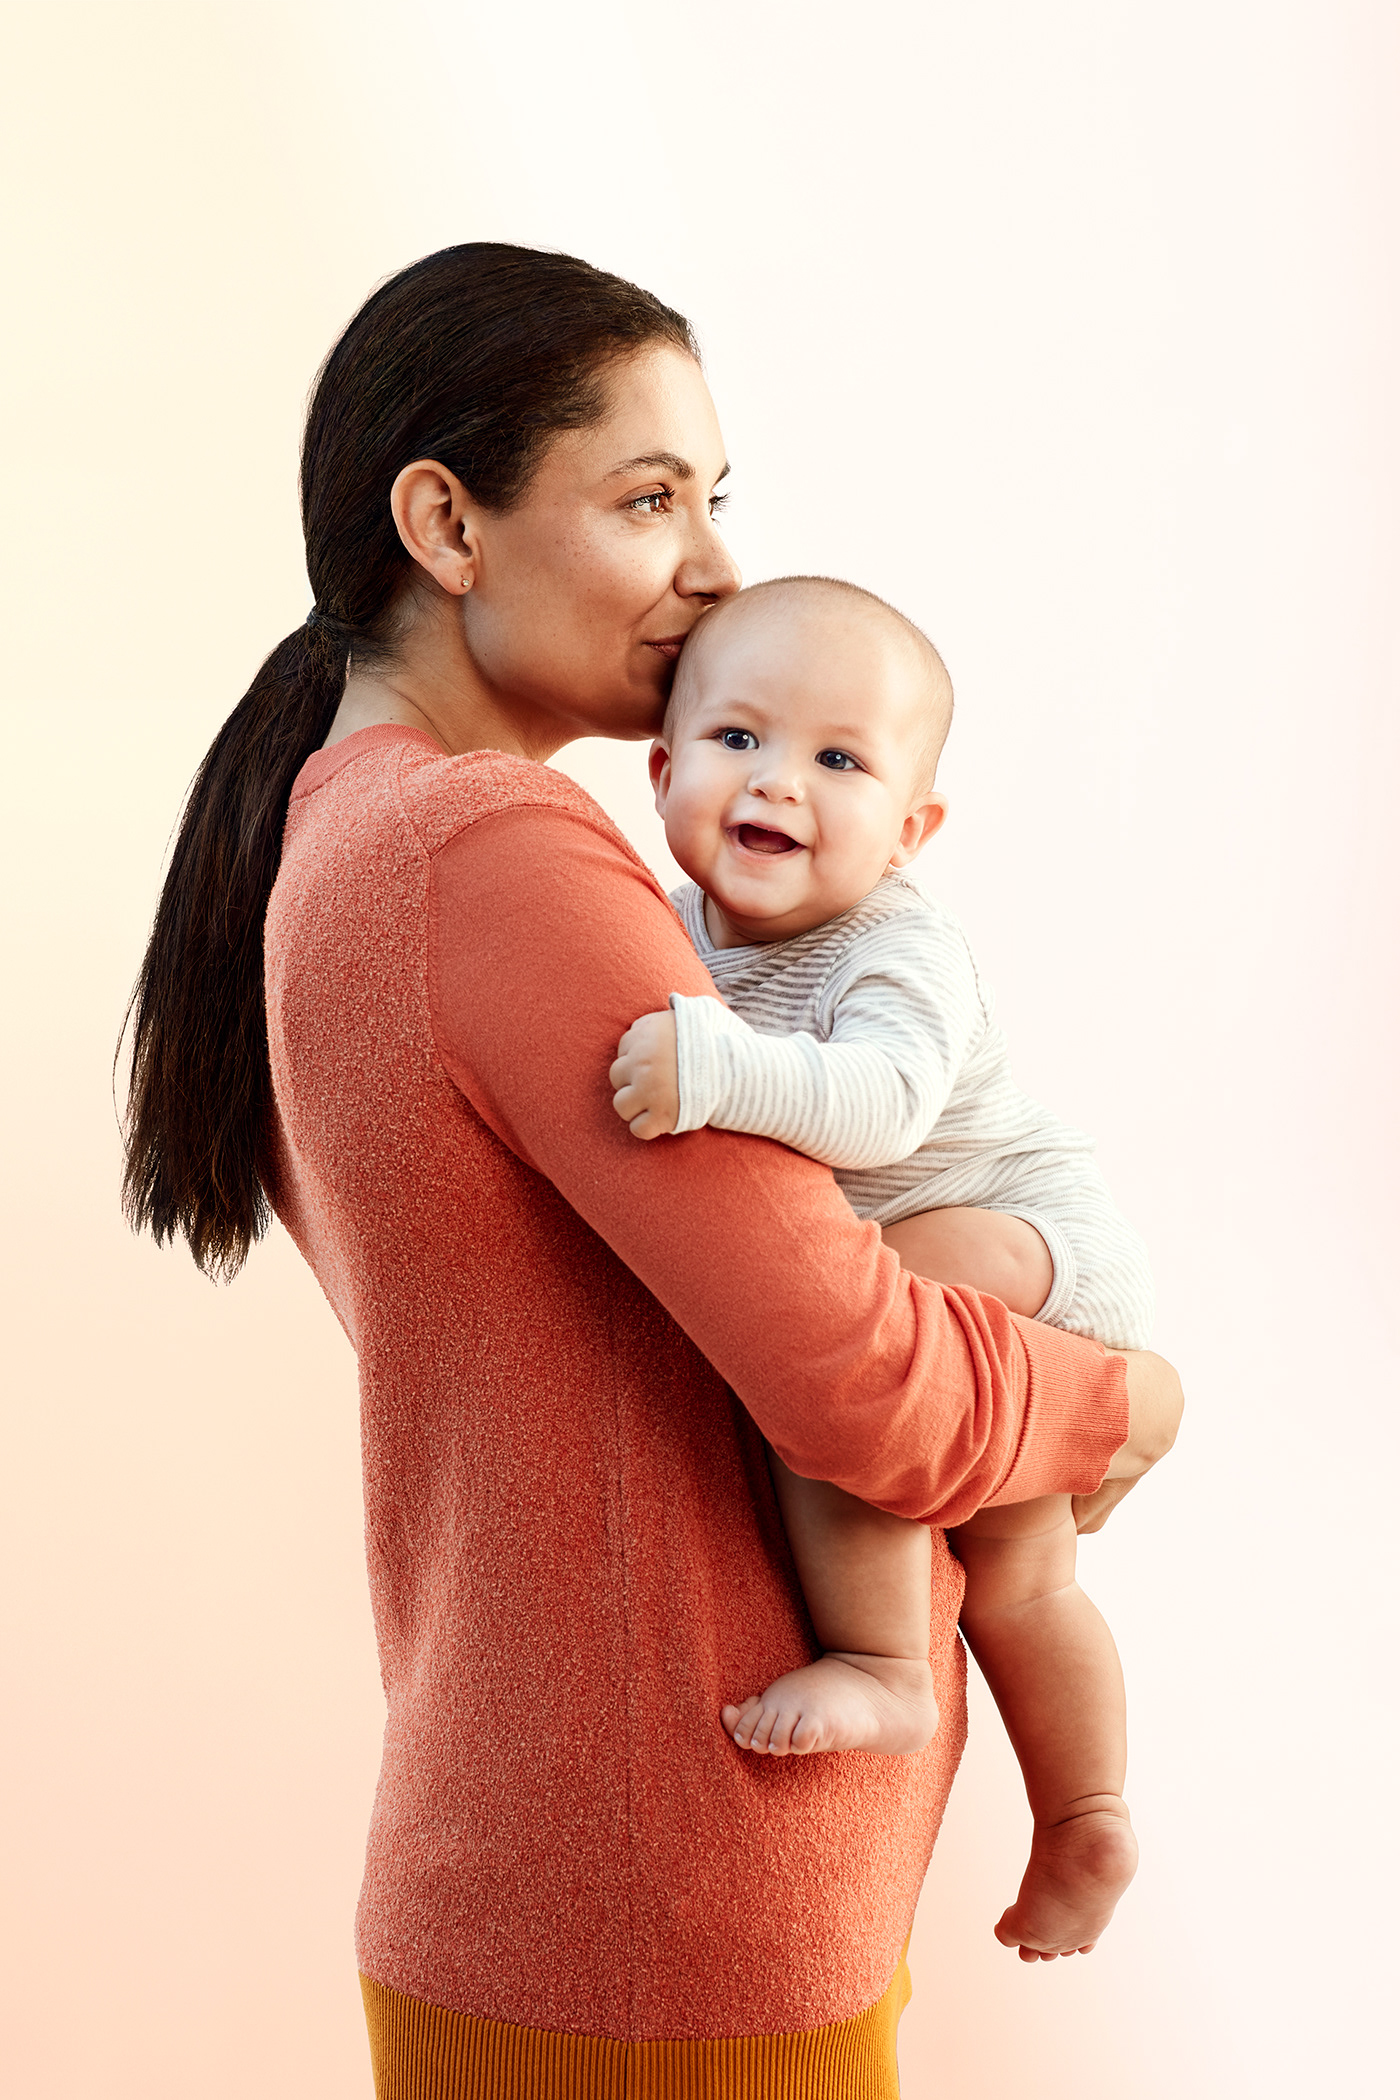 Mother with long dark hair in low-ponytail holding smiling baby in arms, kissing baby's head. 